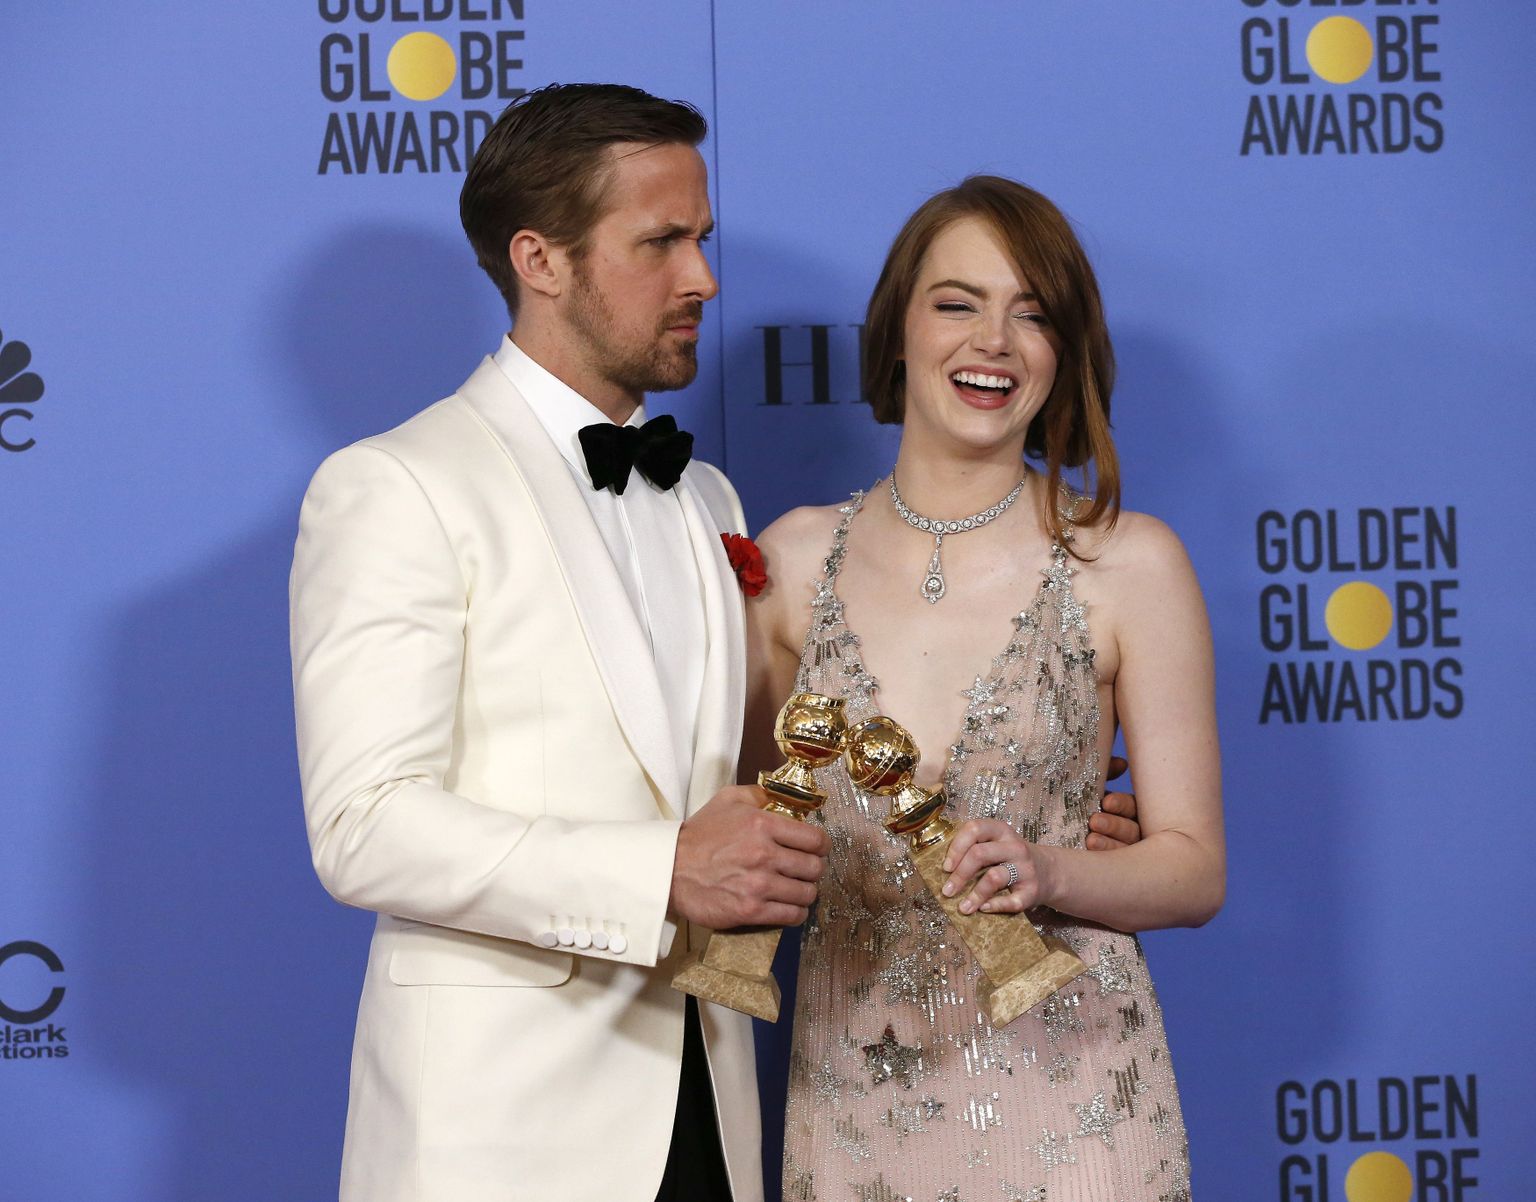 Ryan Gosling and Emma Stone pose with their awards for Best Performance by an Actor in a Motion Picture - Musical or Comedy and Best Performance by an Actress in a Motion Picture - Musical or Comedy for their roles in "La La Land" during the 74th Annual Golden Globe Awards in Beverly Hills, California, U.S., January 8, 2017.  REUTERS/Mario Anzuoni